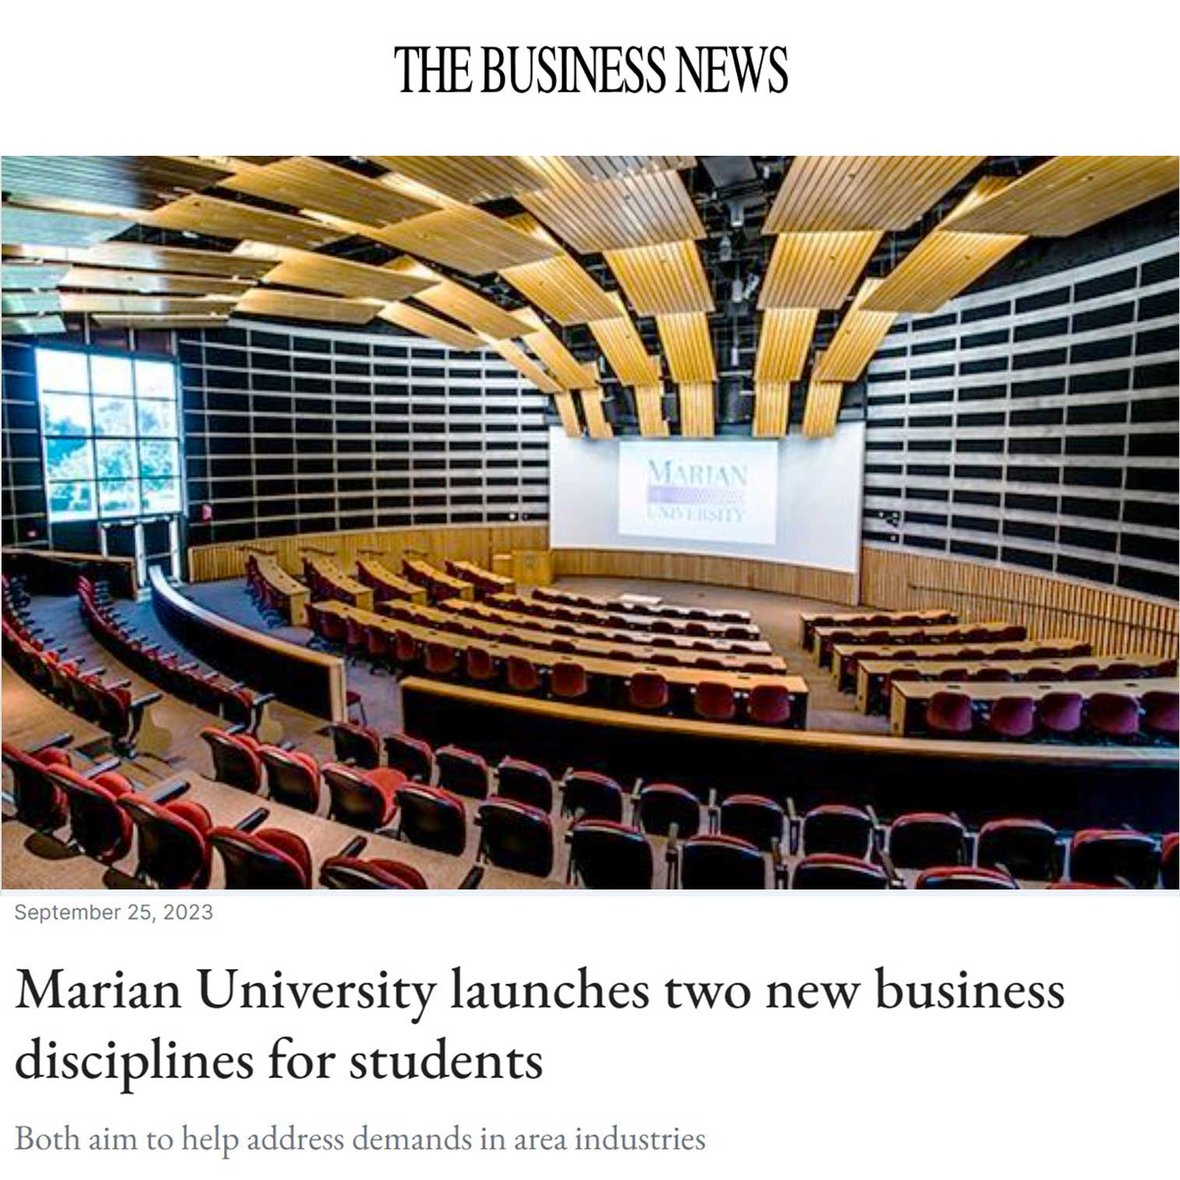 Article photo of Marian University auditorium to accompany business news story of construction management and insurance disciplines